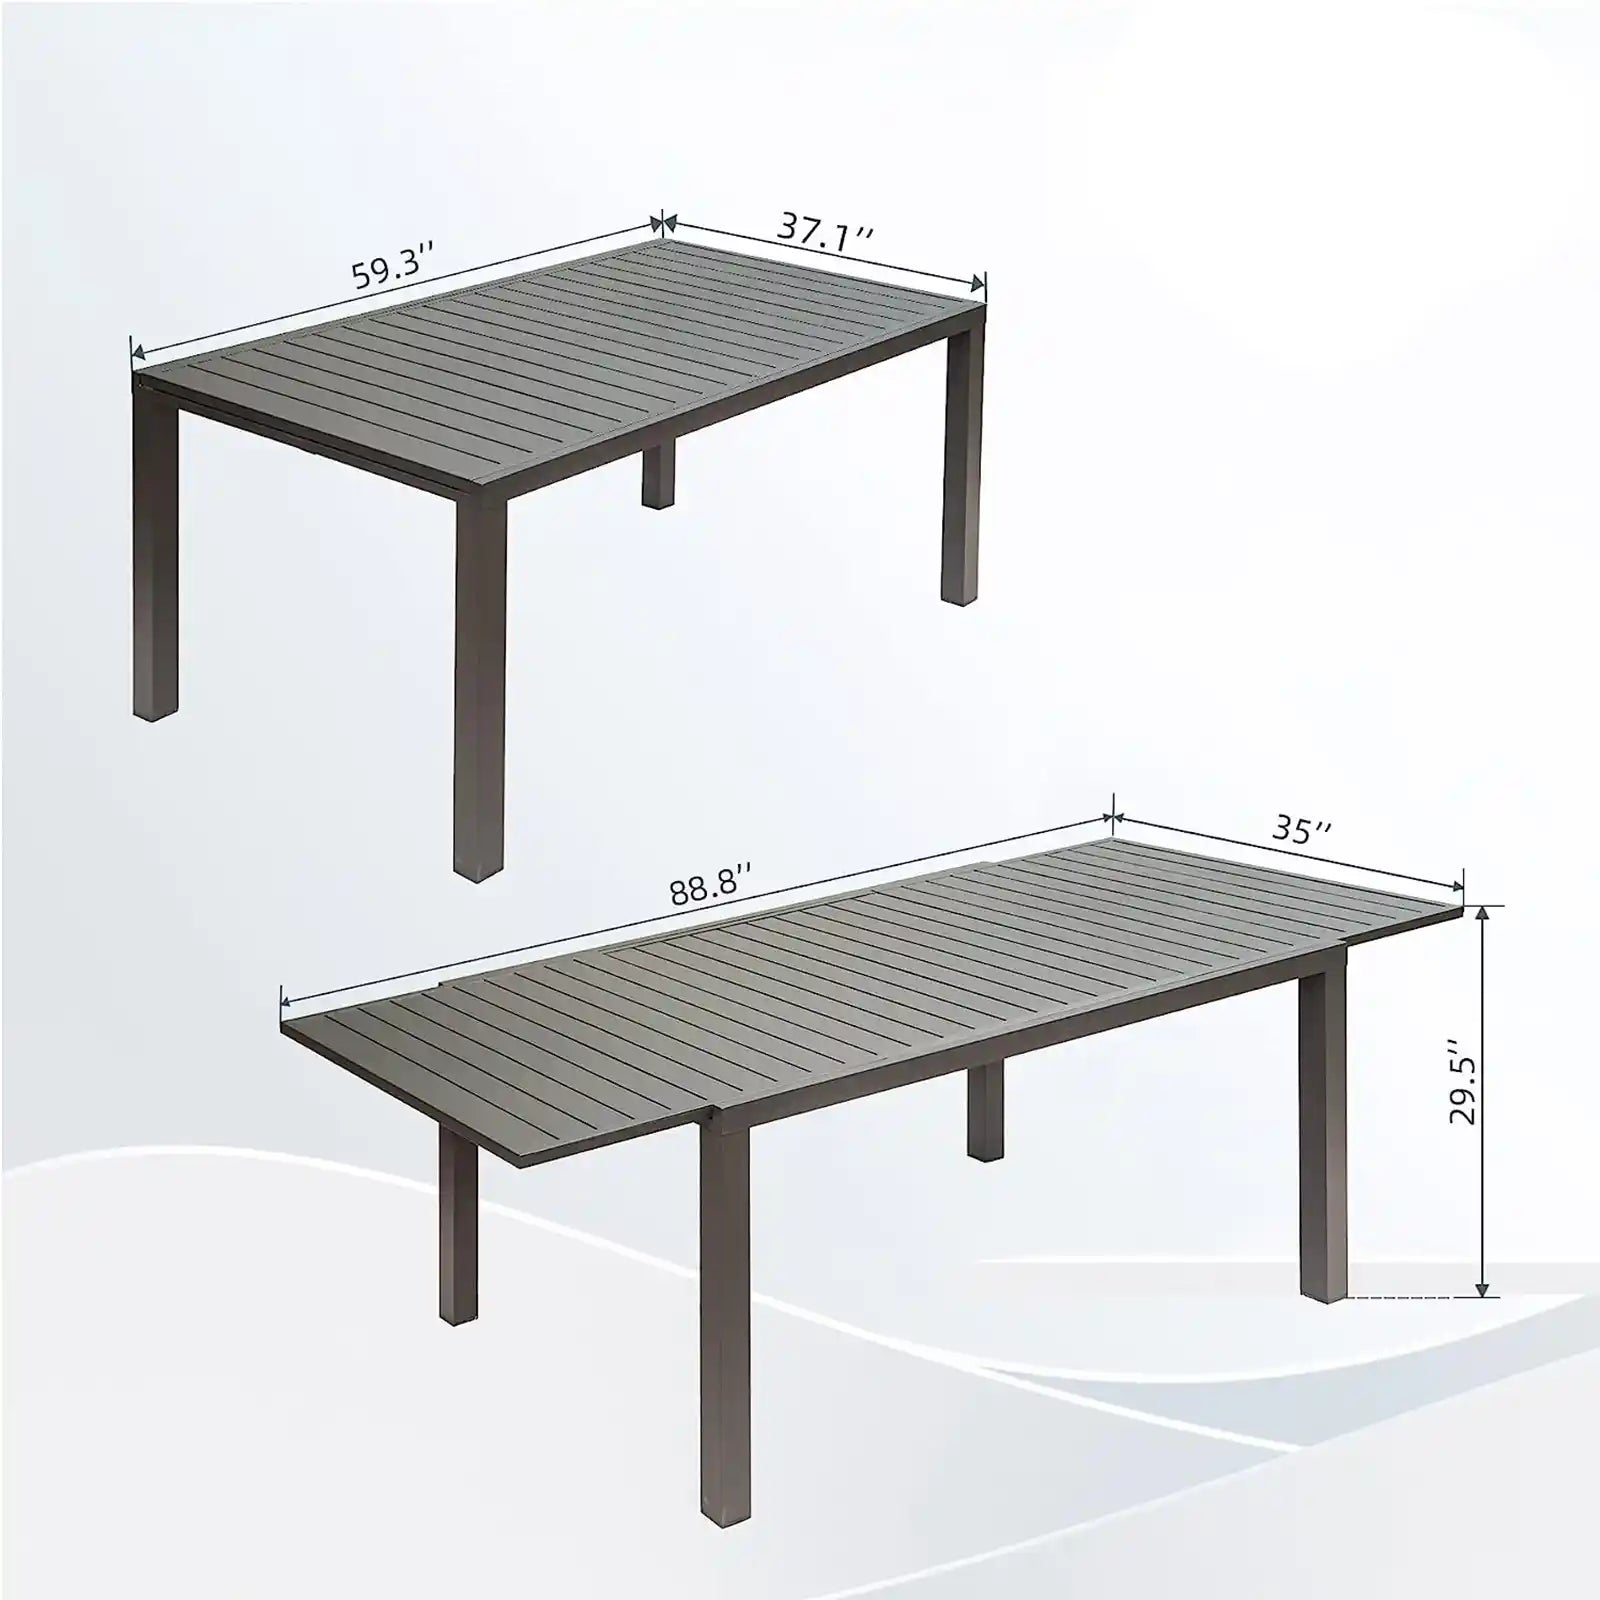 Patio Dining Expandable Table, Metal Outdoor Table for Porch Lawn Garden Bistro